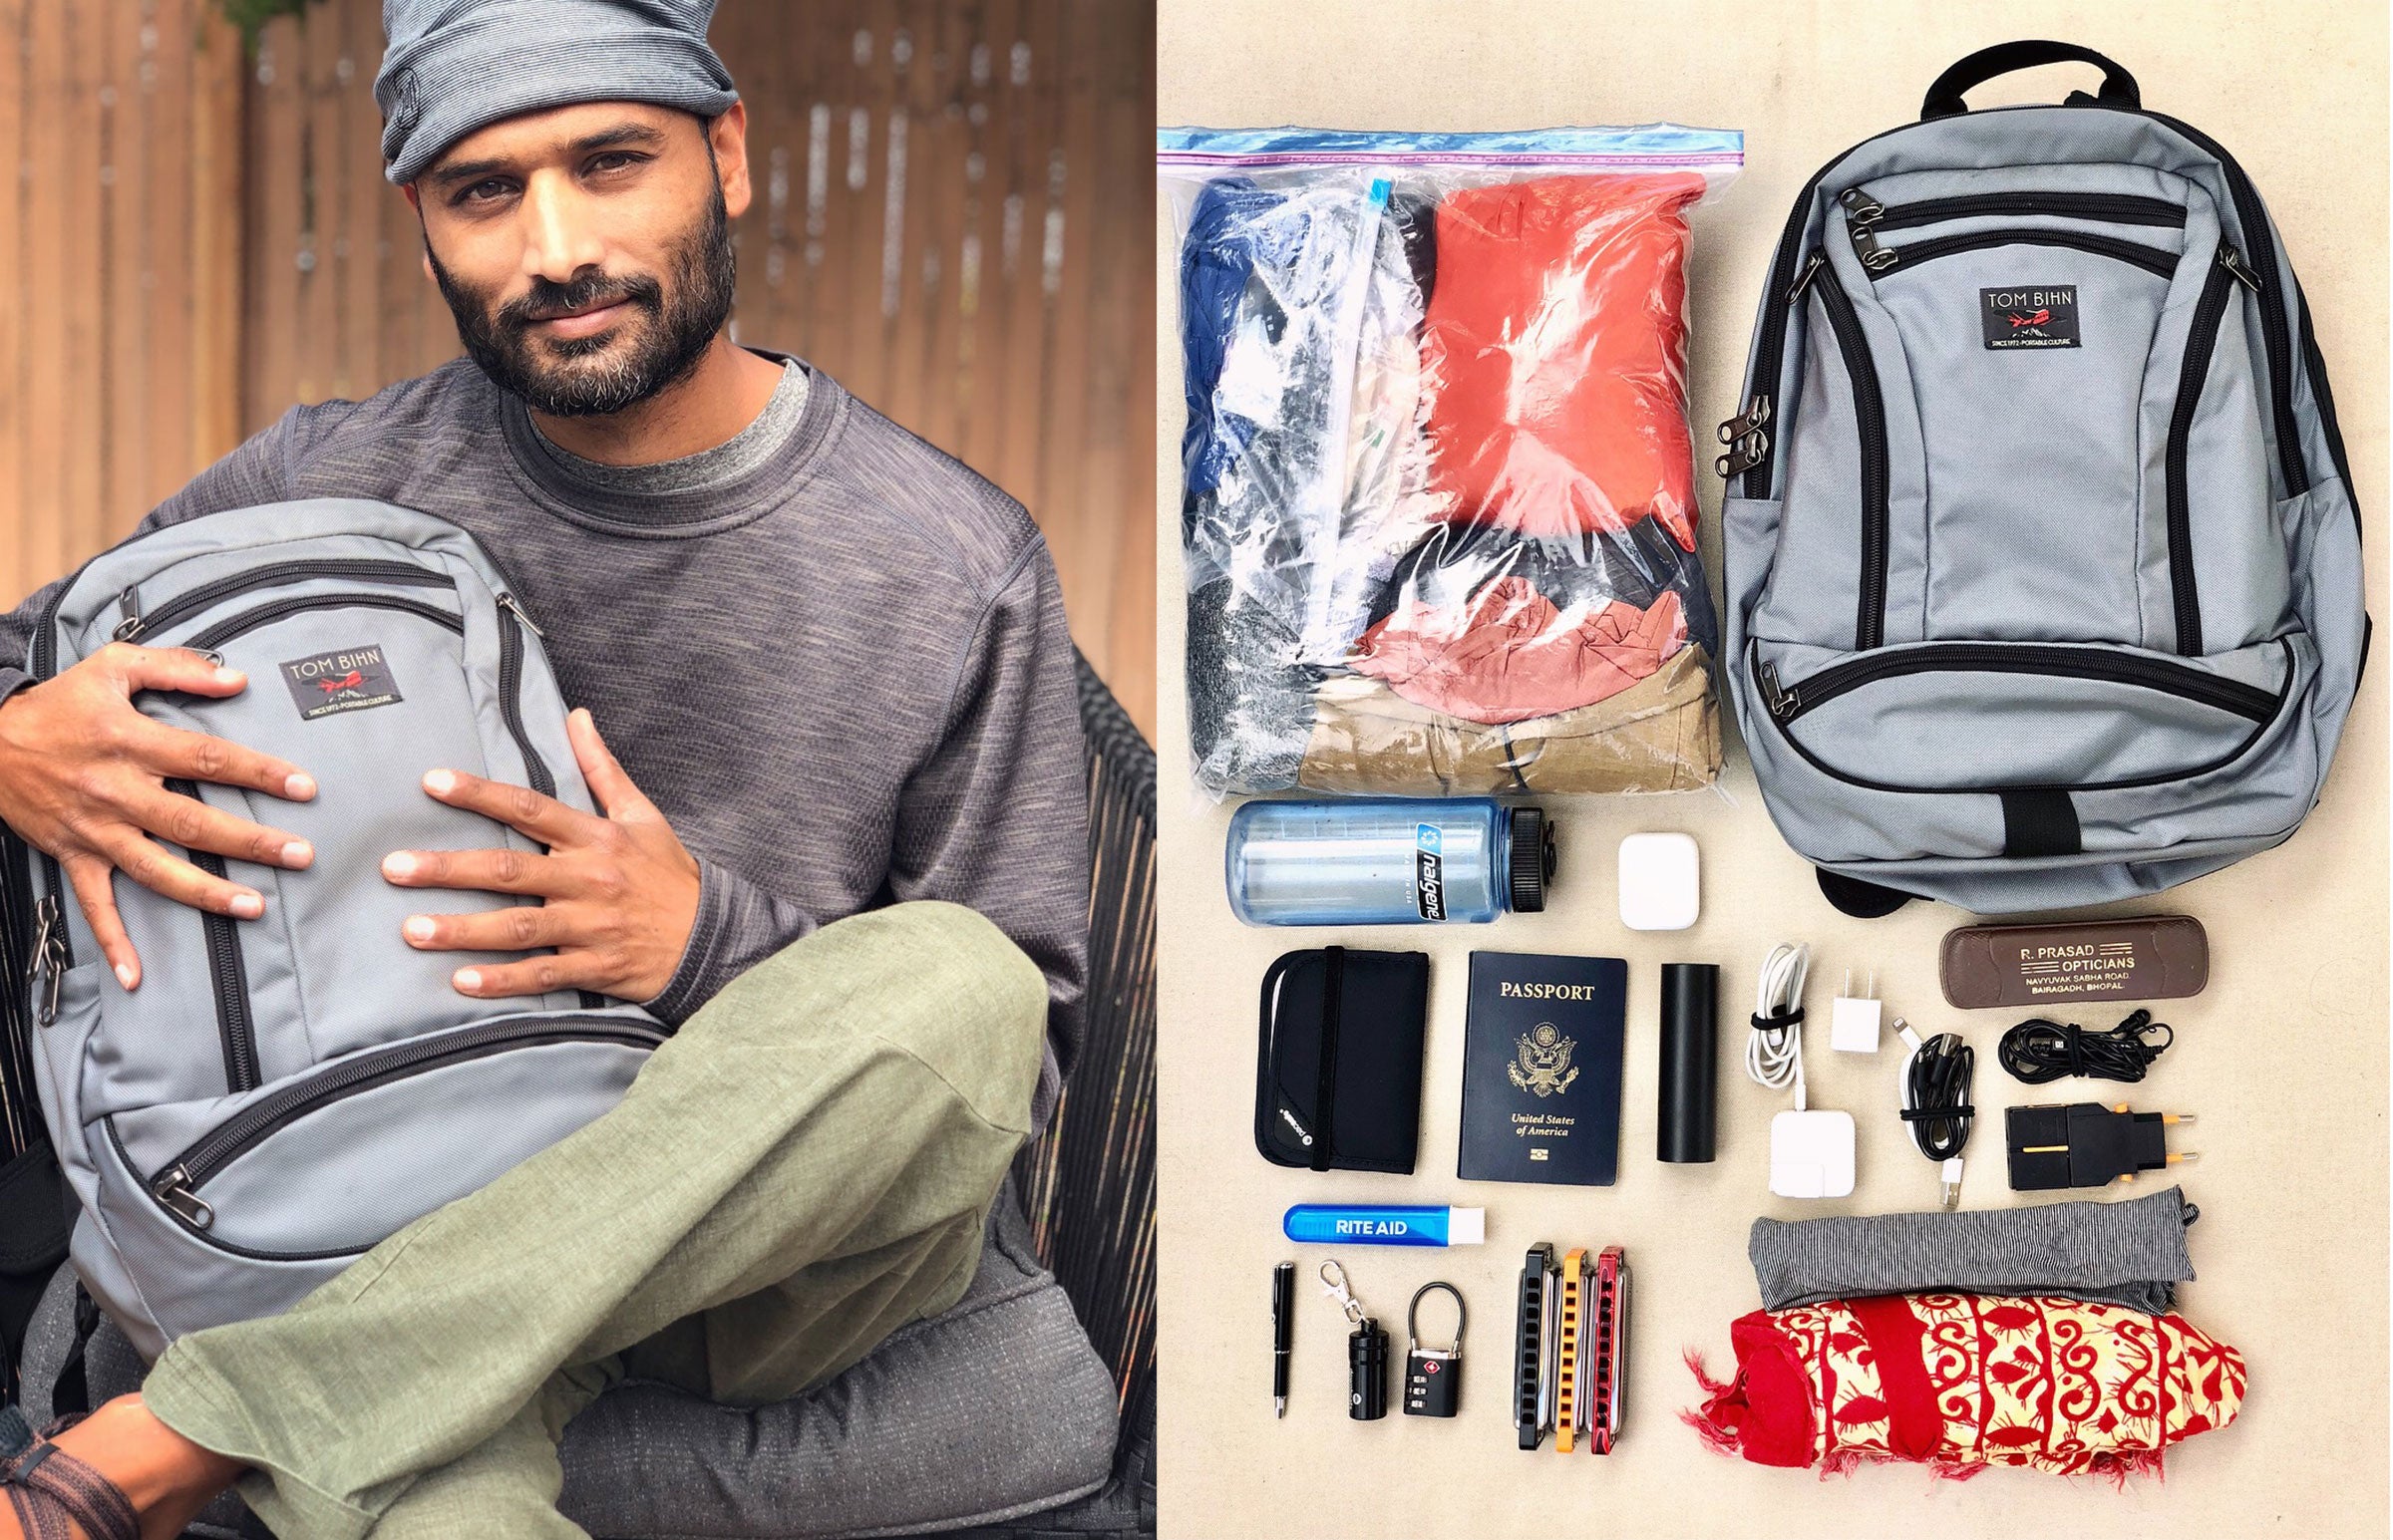 Extreme Minimalist Travel using the TOM BIHN Synapse 19 Backpack: An Interview with Rishi O